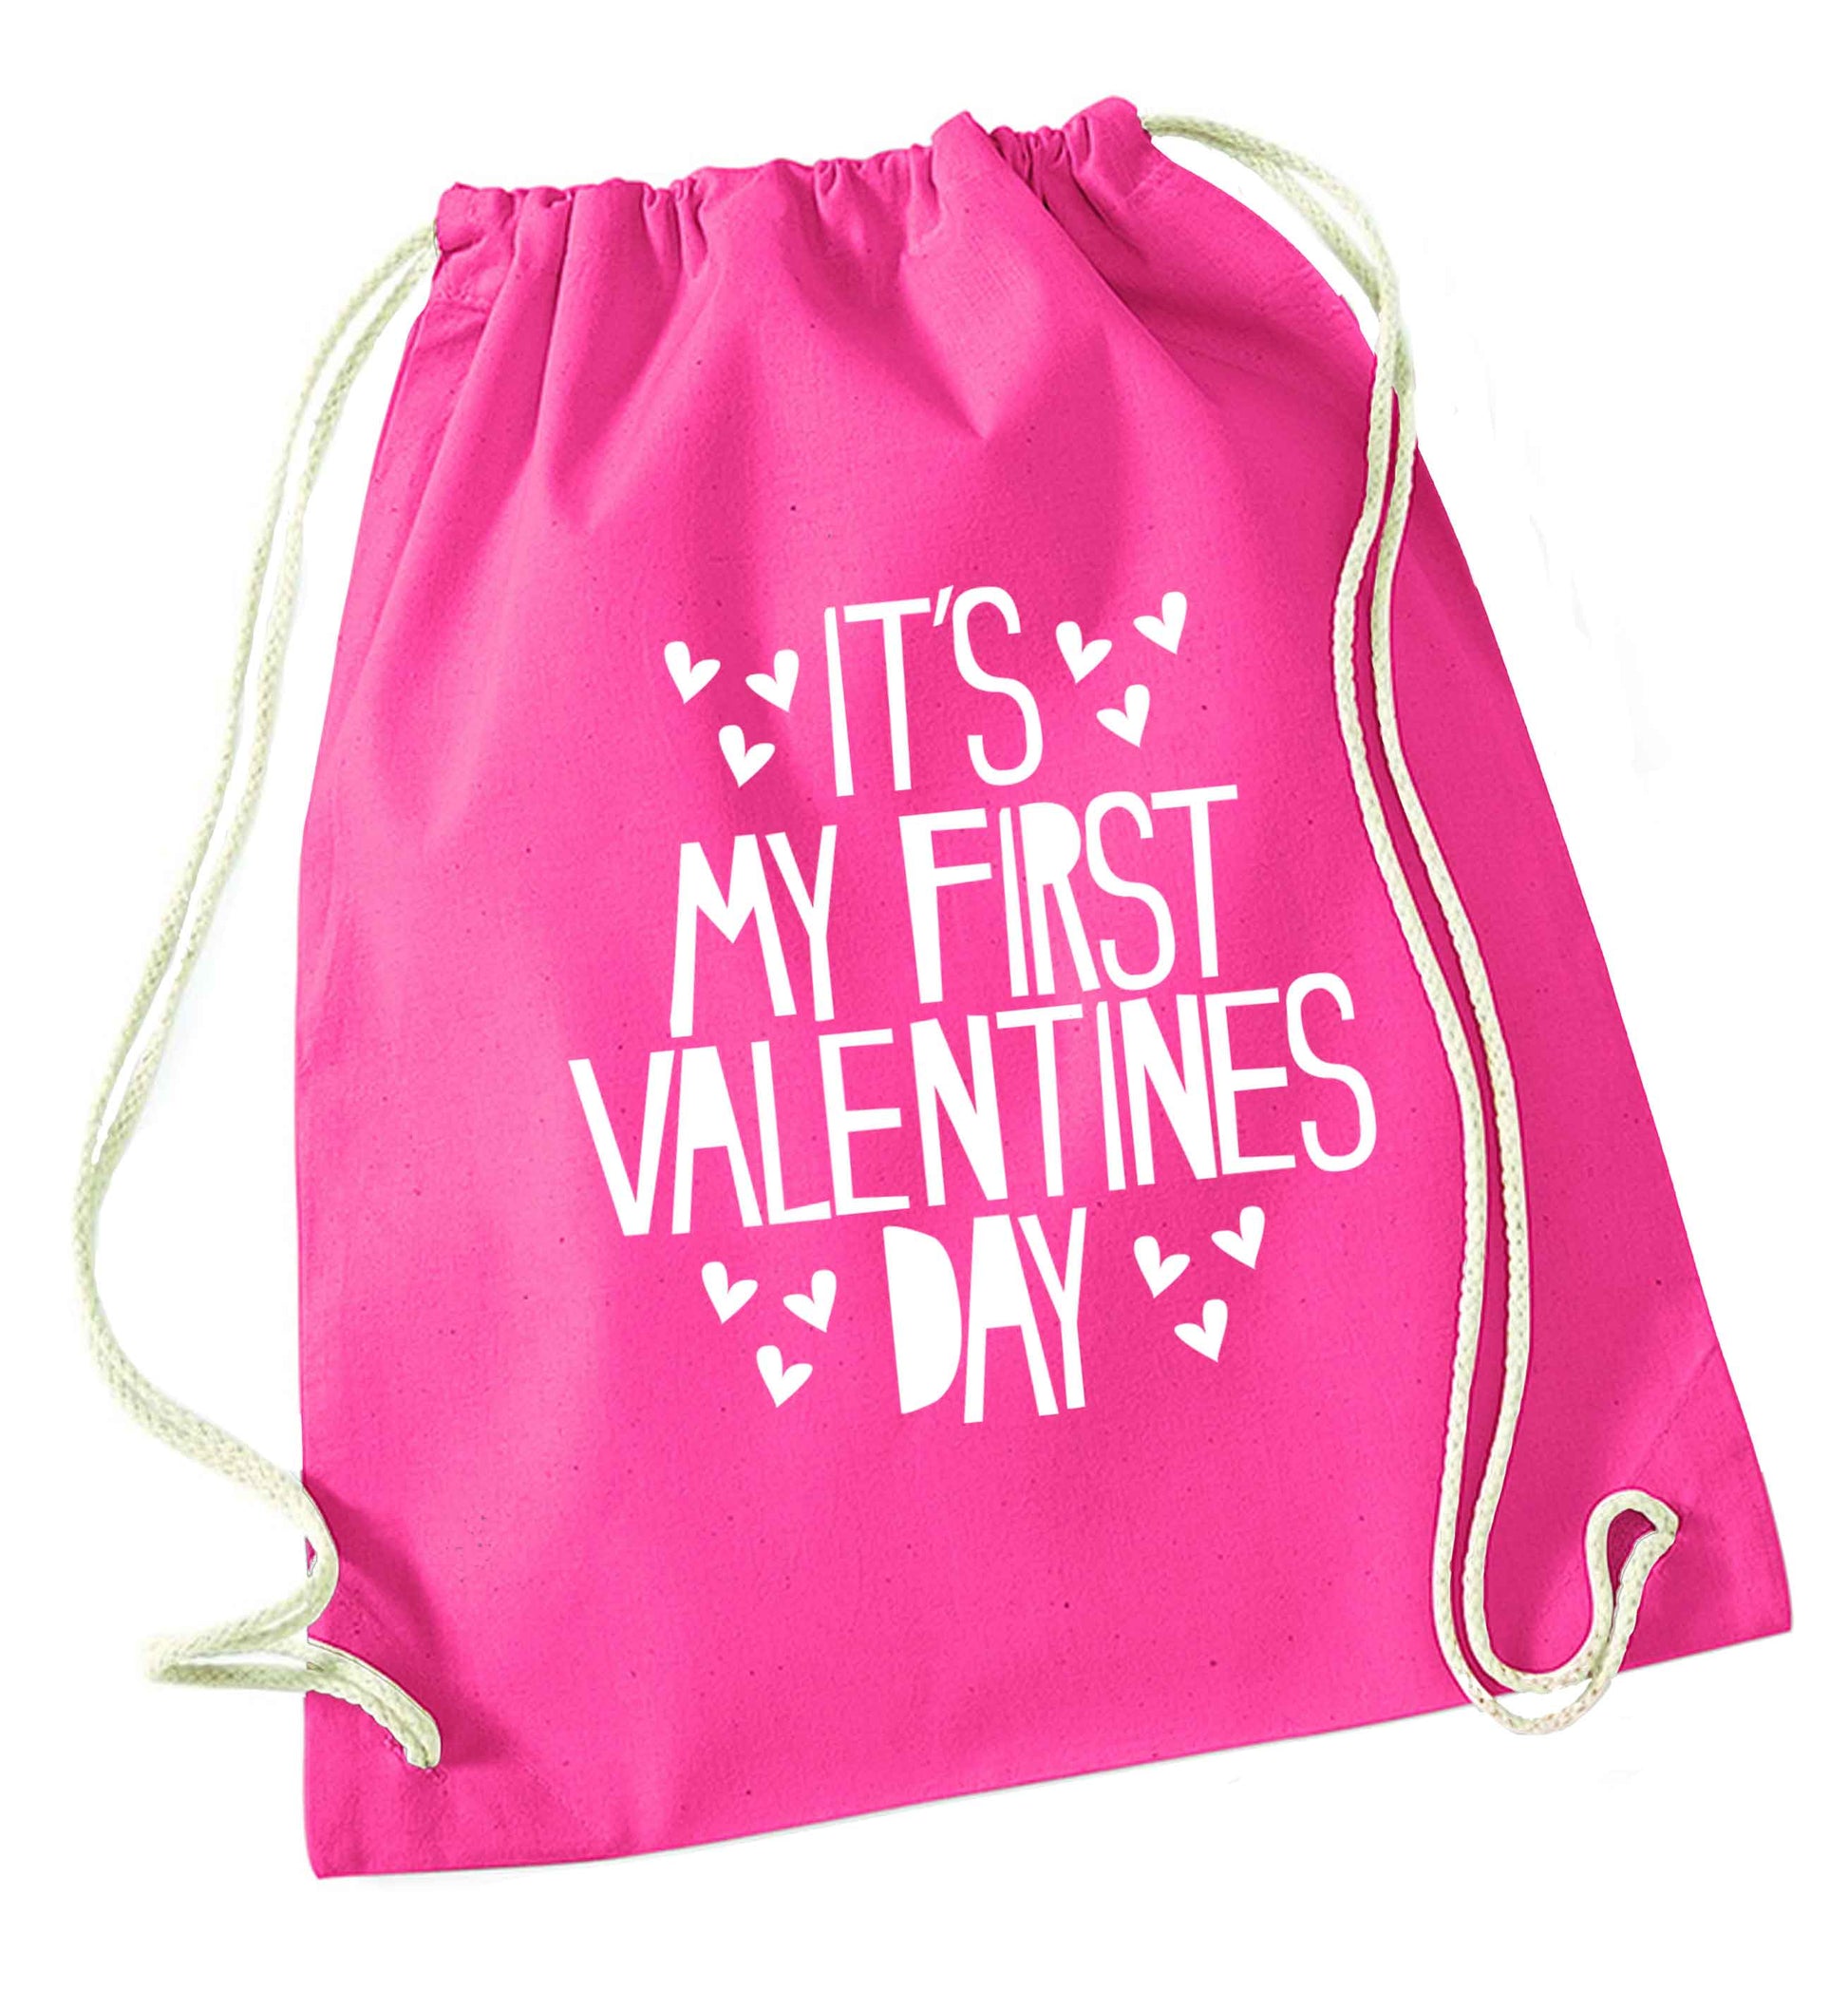 Hearts It's my First Valentine's Day pink drawstring bag